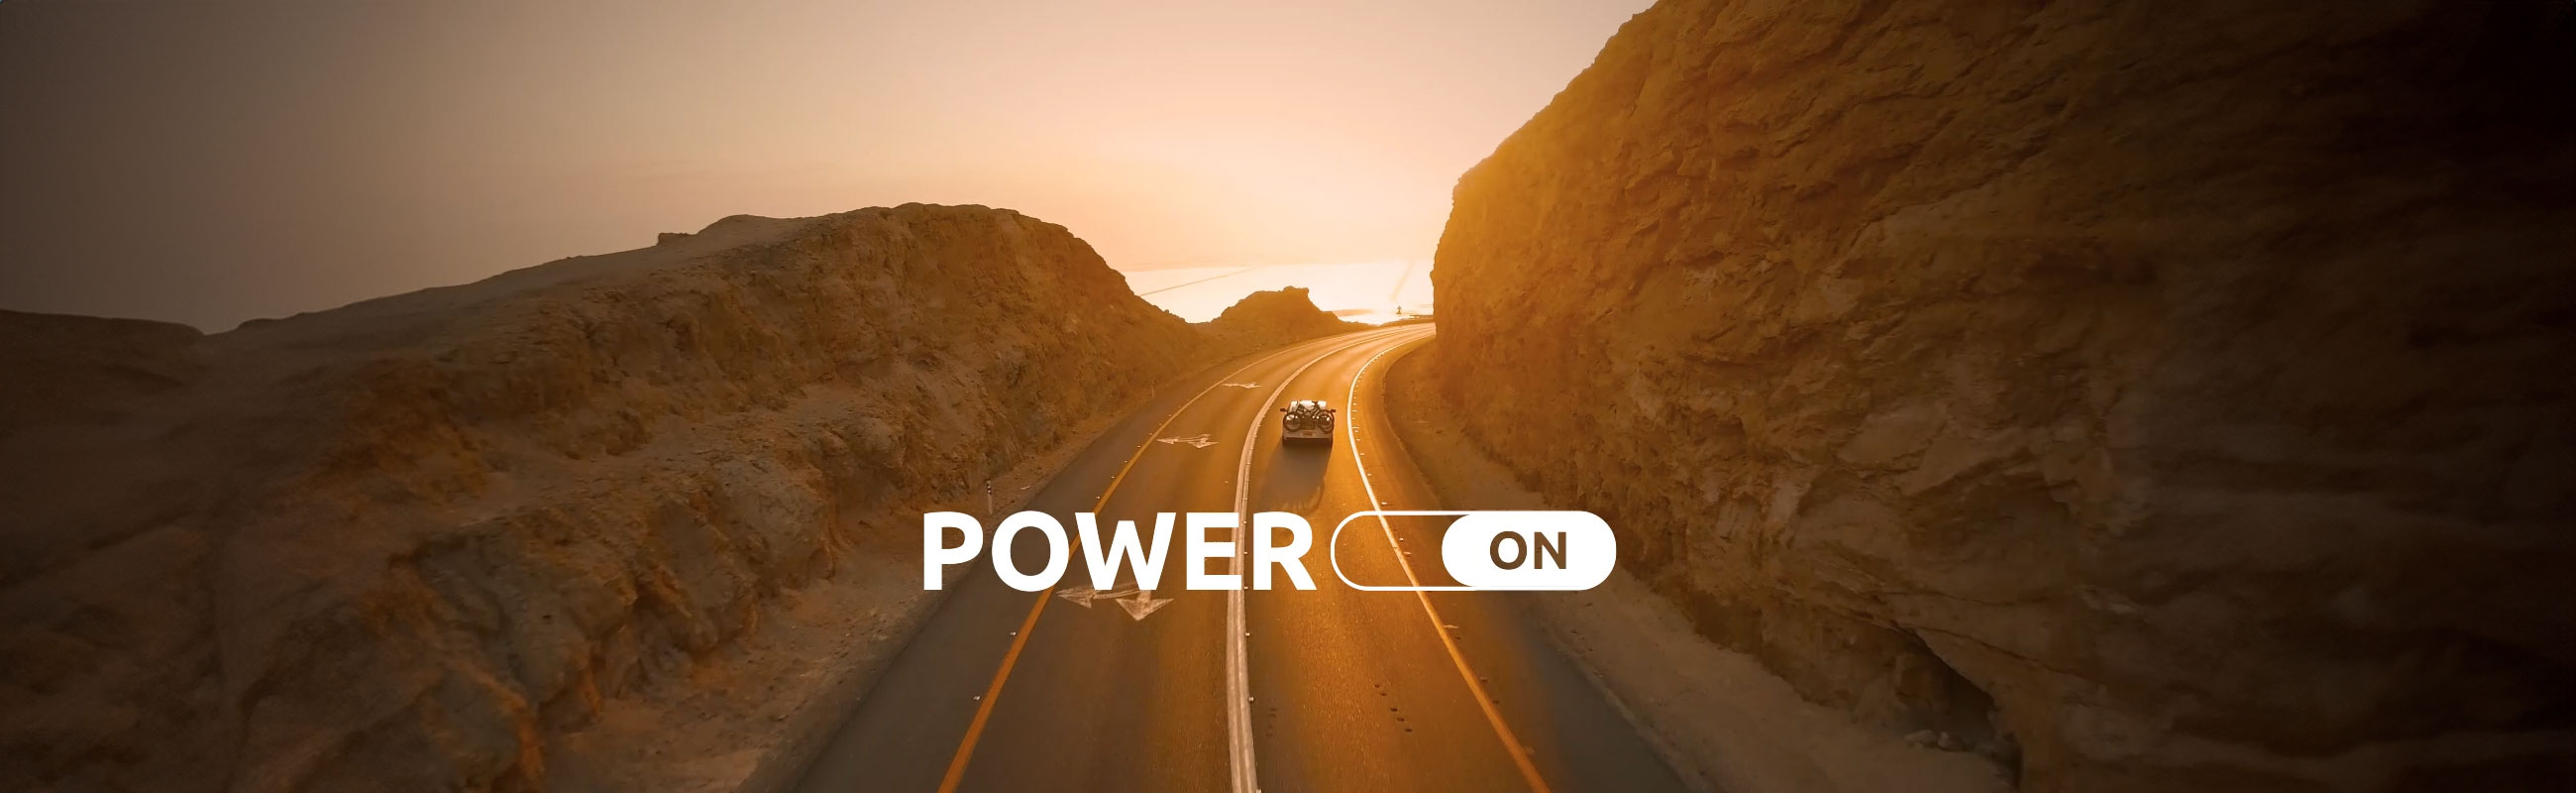 Batteries Plus Sparks Spring Adventures with Seasonal 'Power On' Campaign